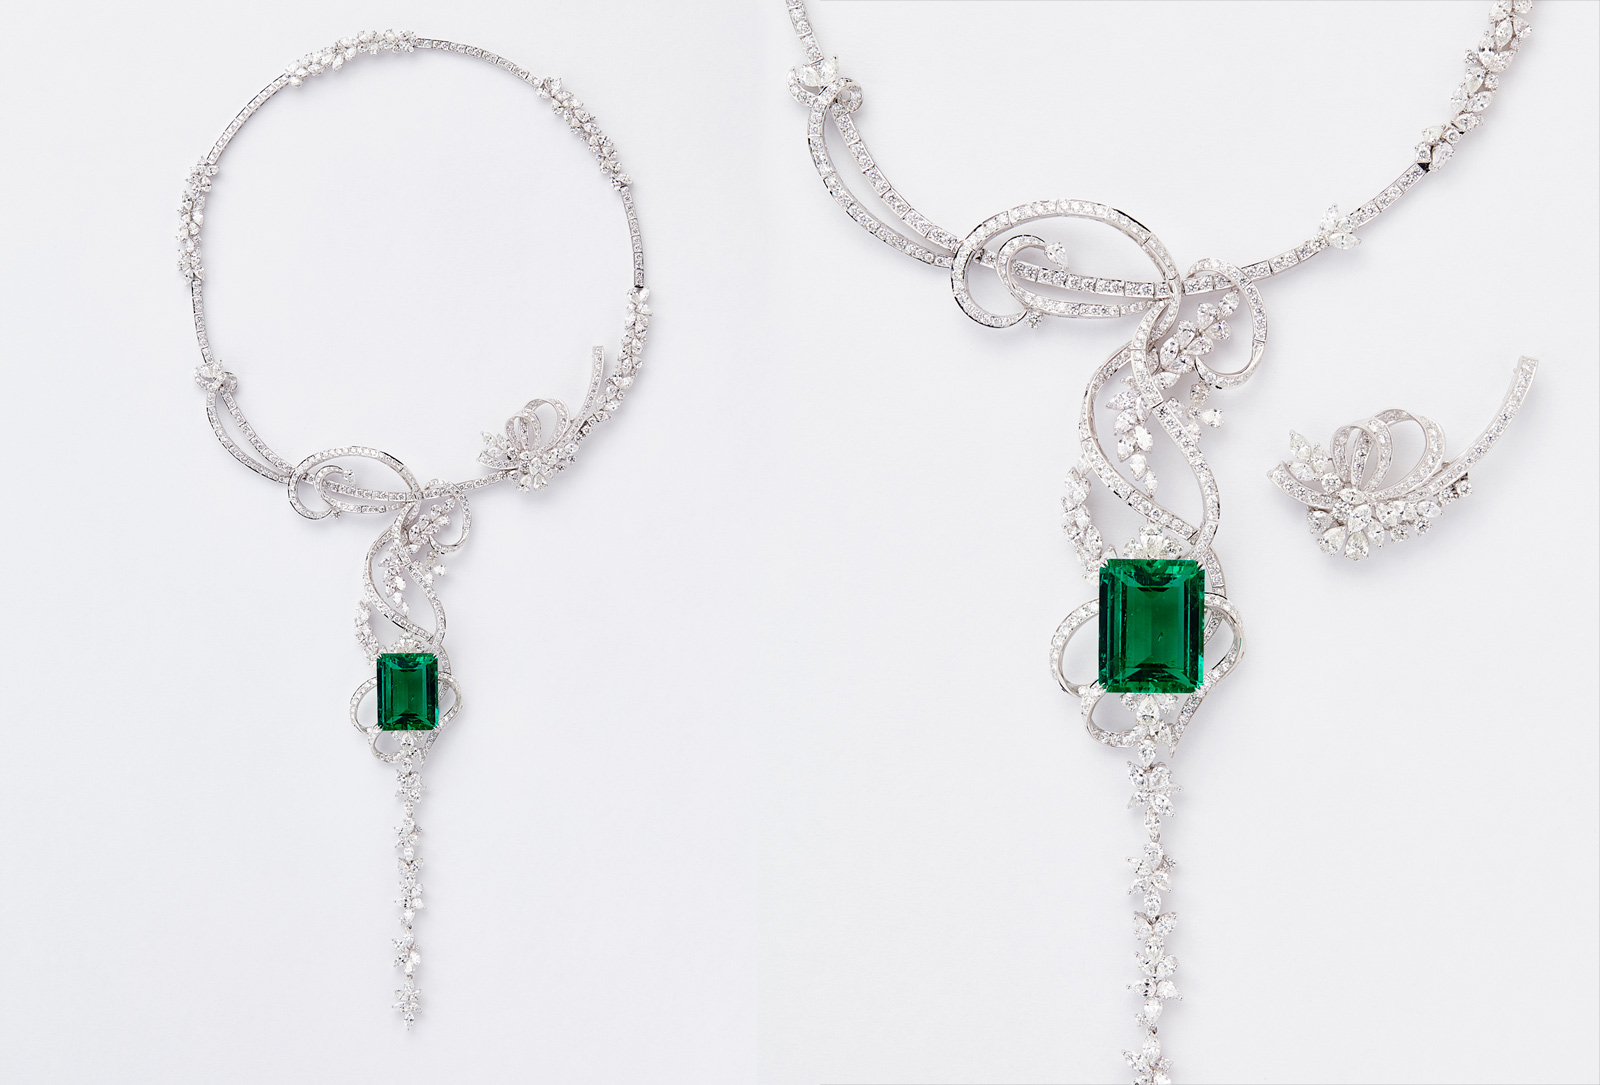 Qiu Fine Jewelry necklace with 32.86 cts Colombian emerald and diamonds